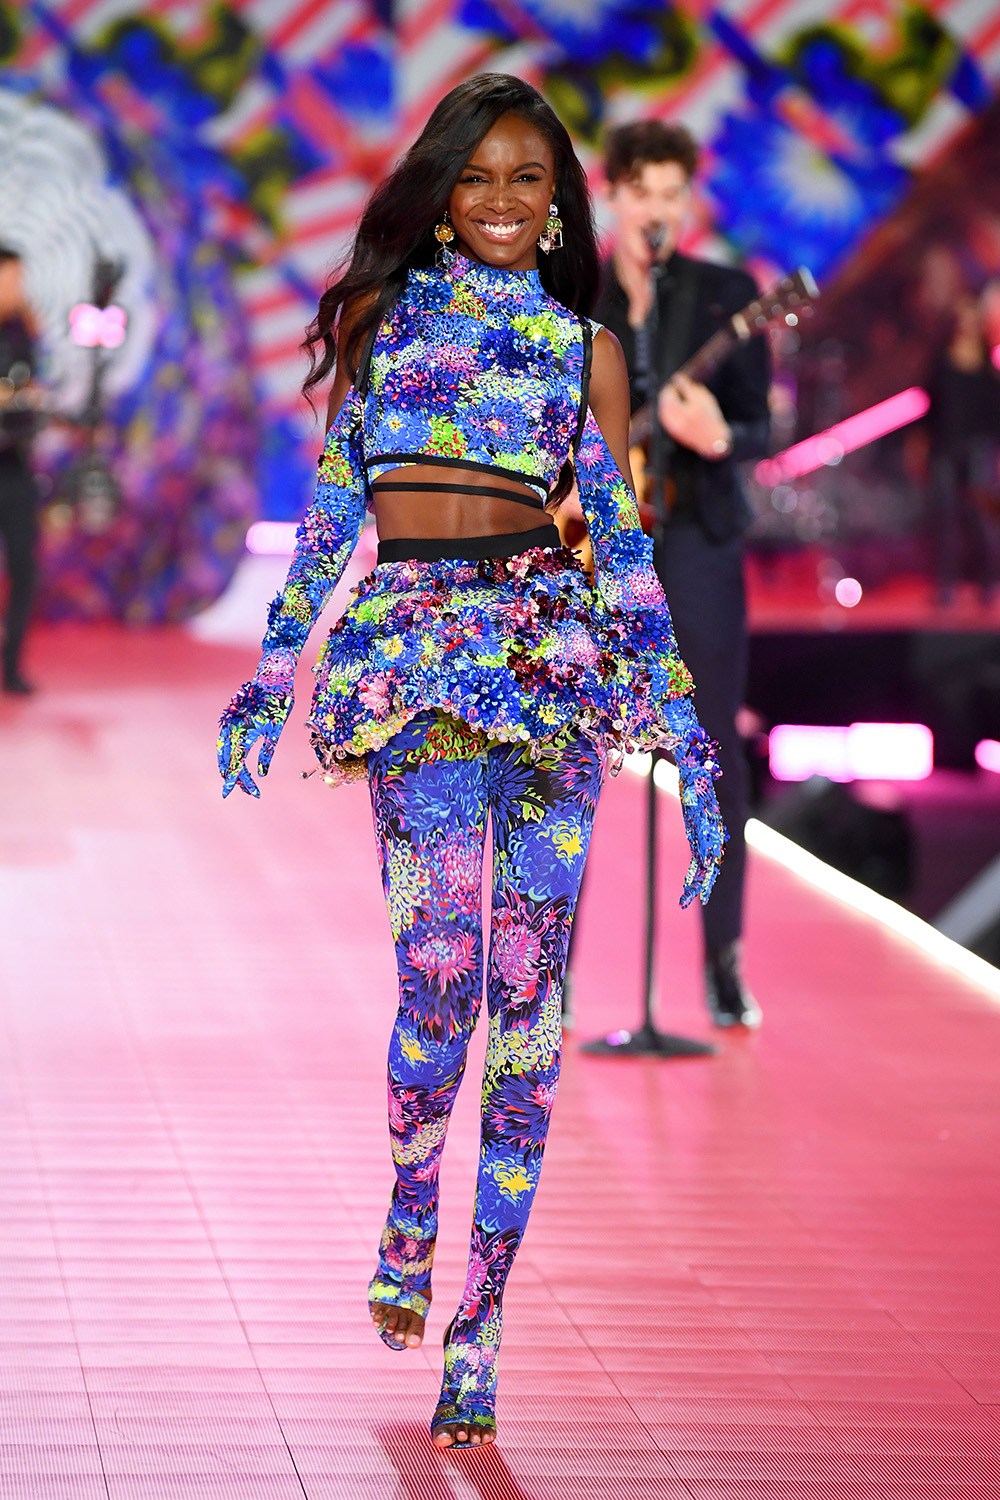 NEW YORK, NY - NOVEMBER 08: Leomie Anderson walks the runway during the 2018 Victoria's Secret Fashion Show at Pier 94 on November 8, 2018 in New York City. (Photo by Dimitrios Kambouris/Getty Images for Victoria's Secret)